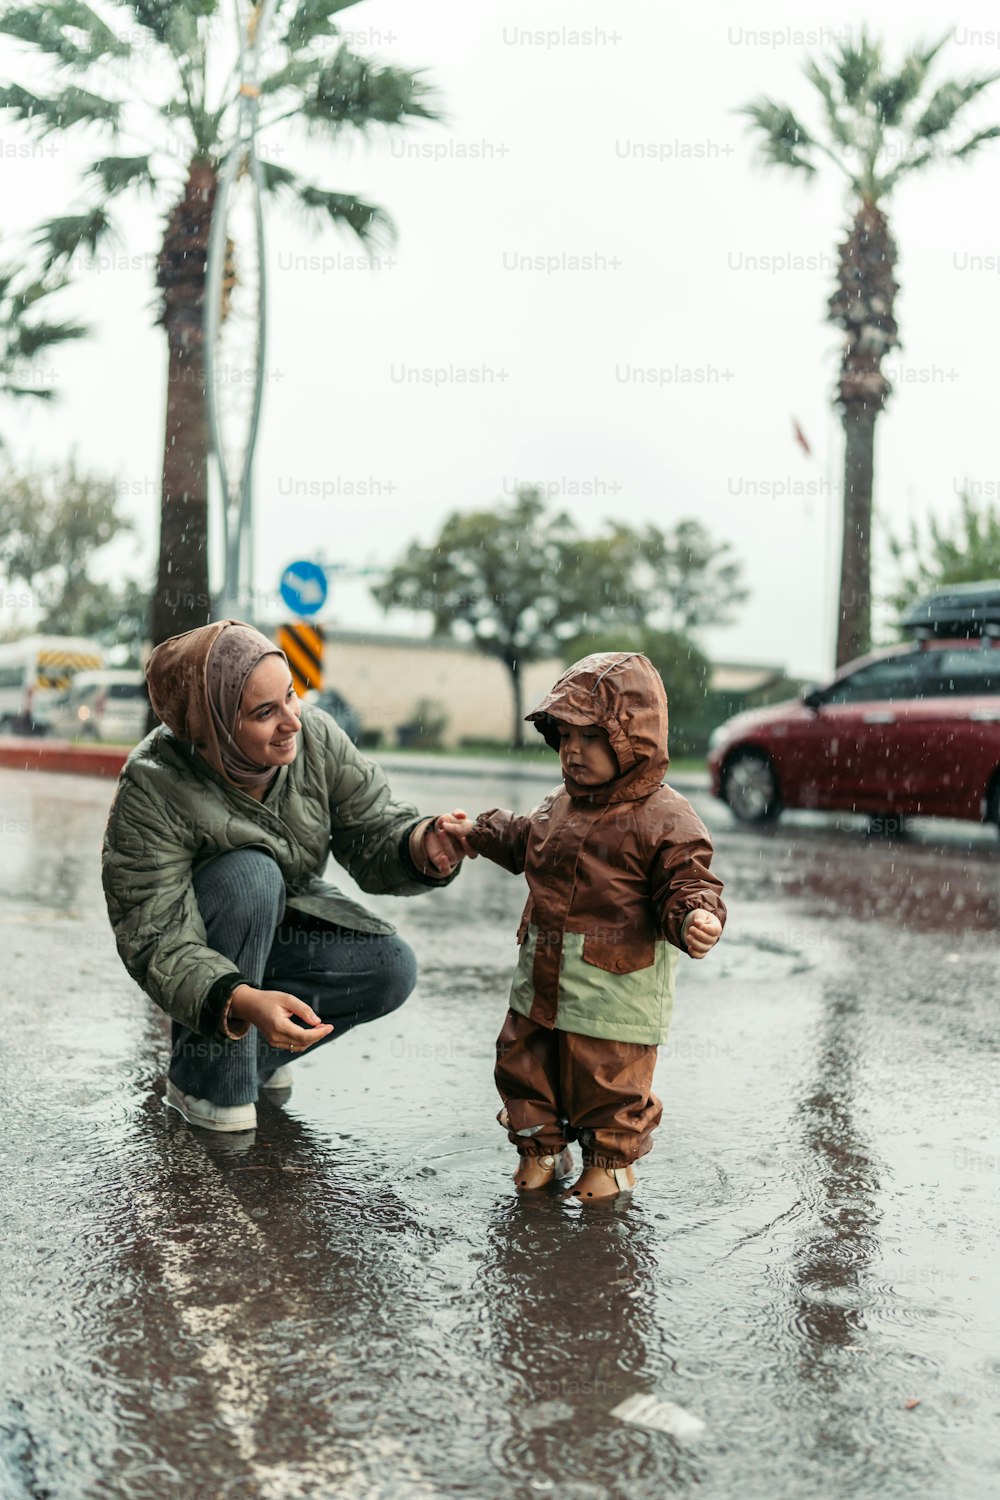 a woman kneeling down next to a child in the rain